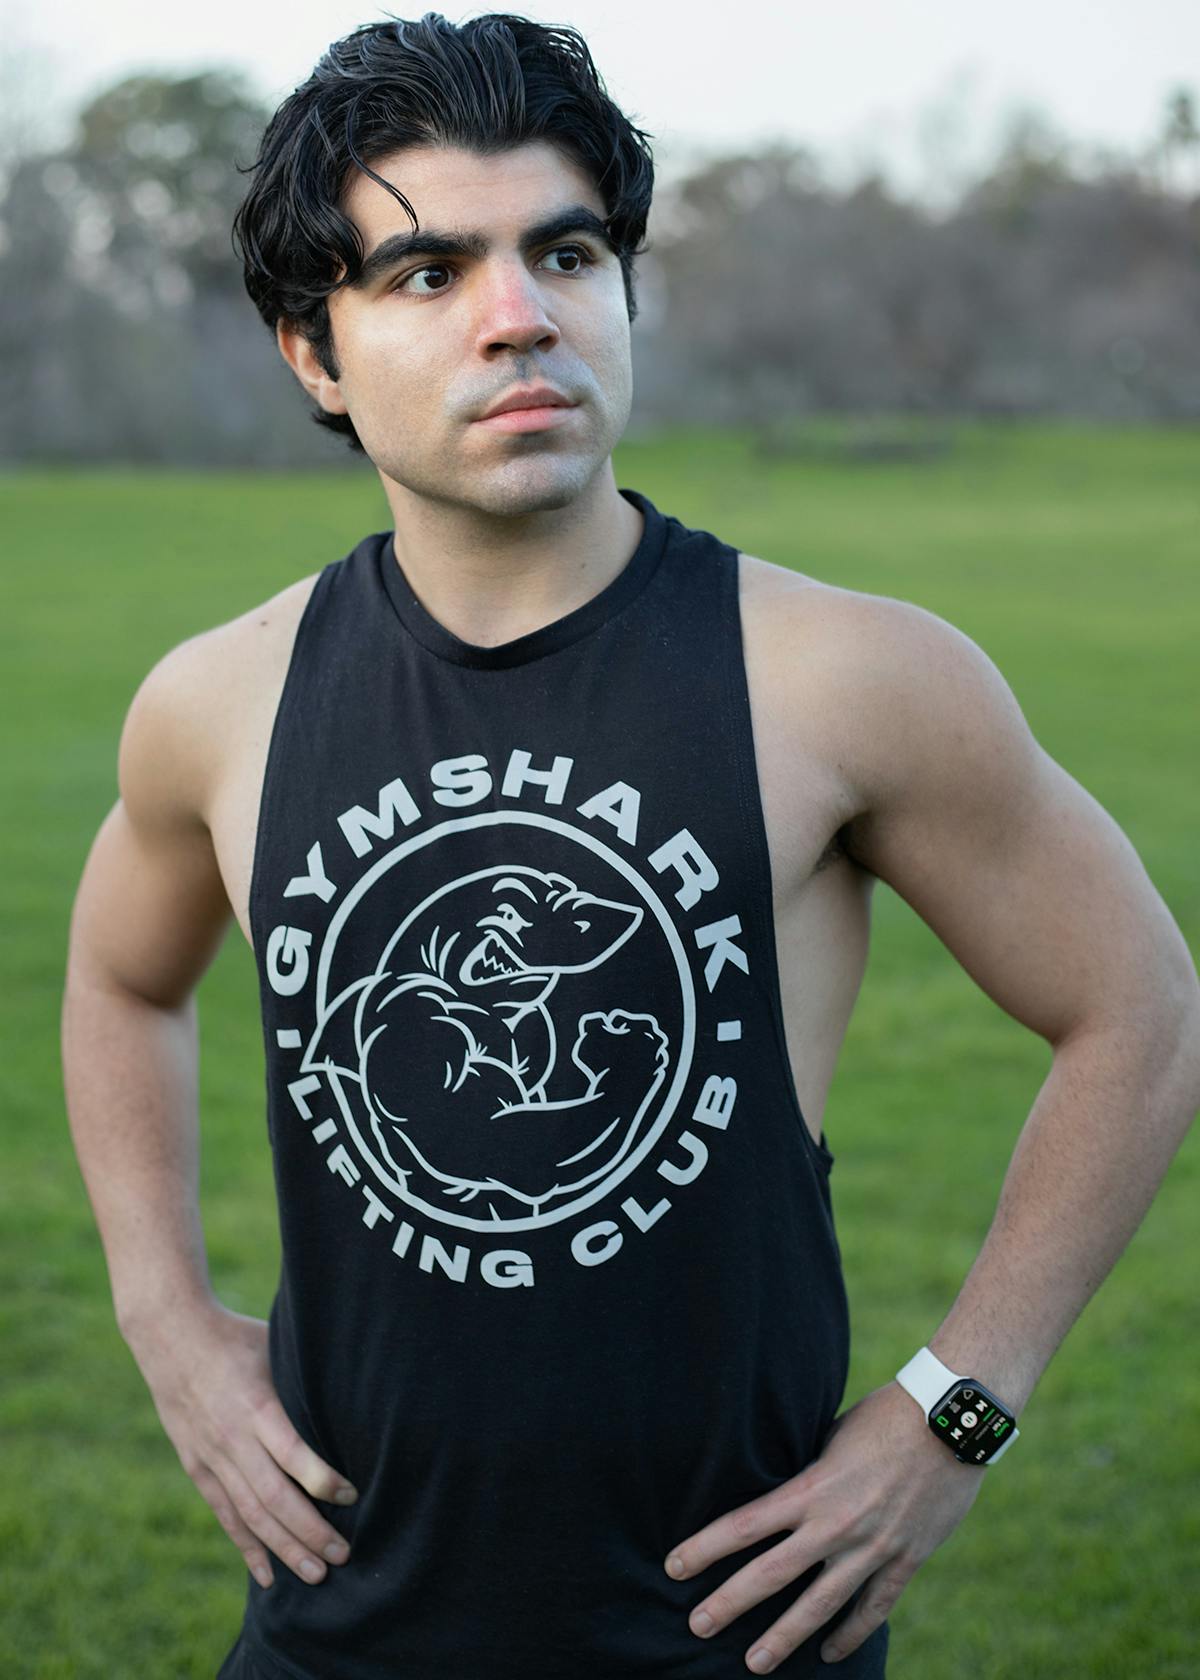 Man posing in park wearing Gymshark tank top during cloudy ambient light.